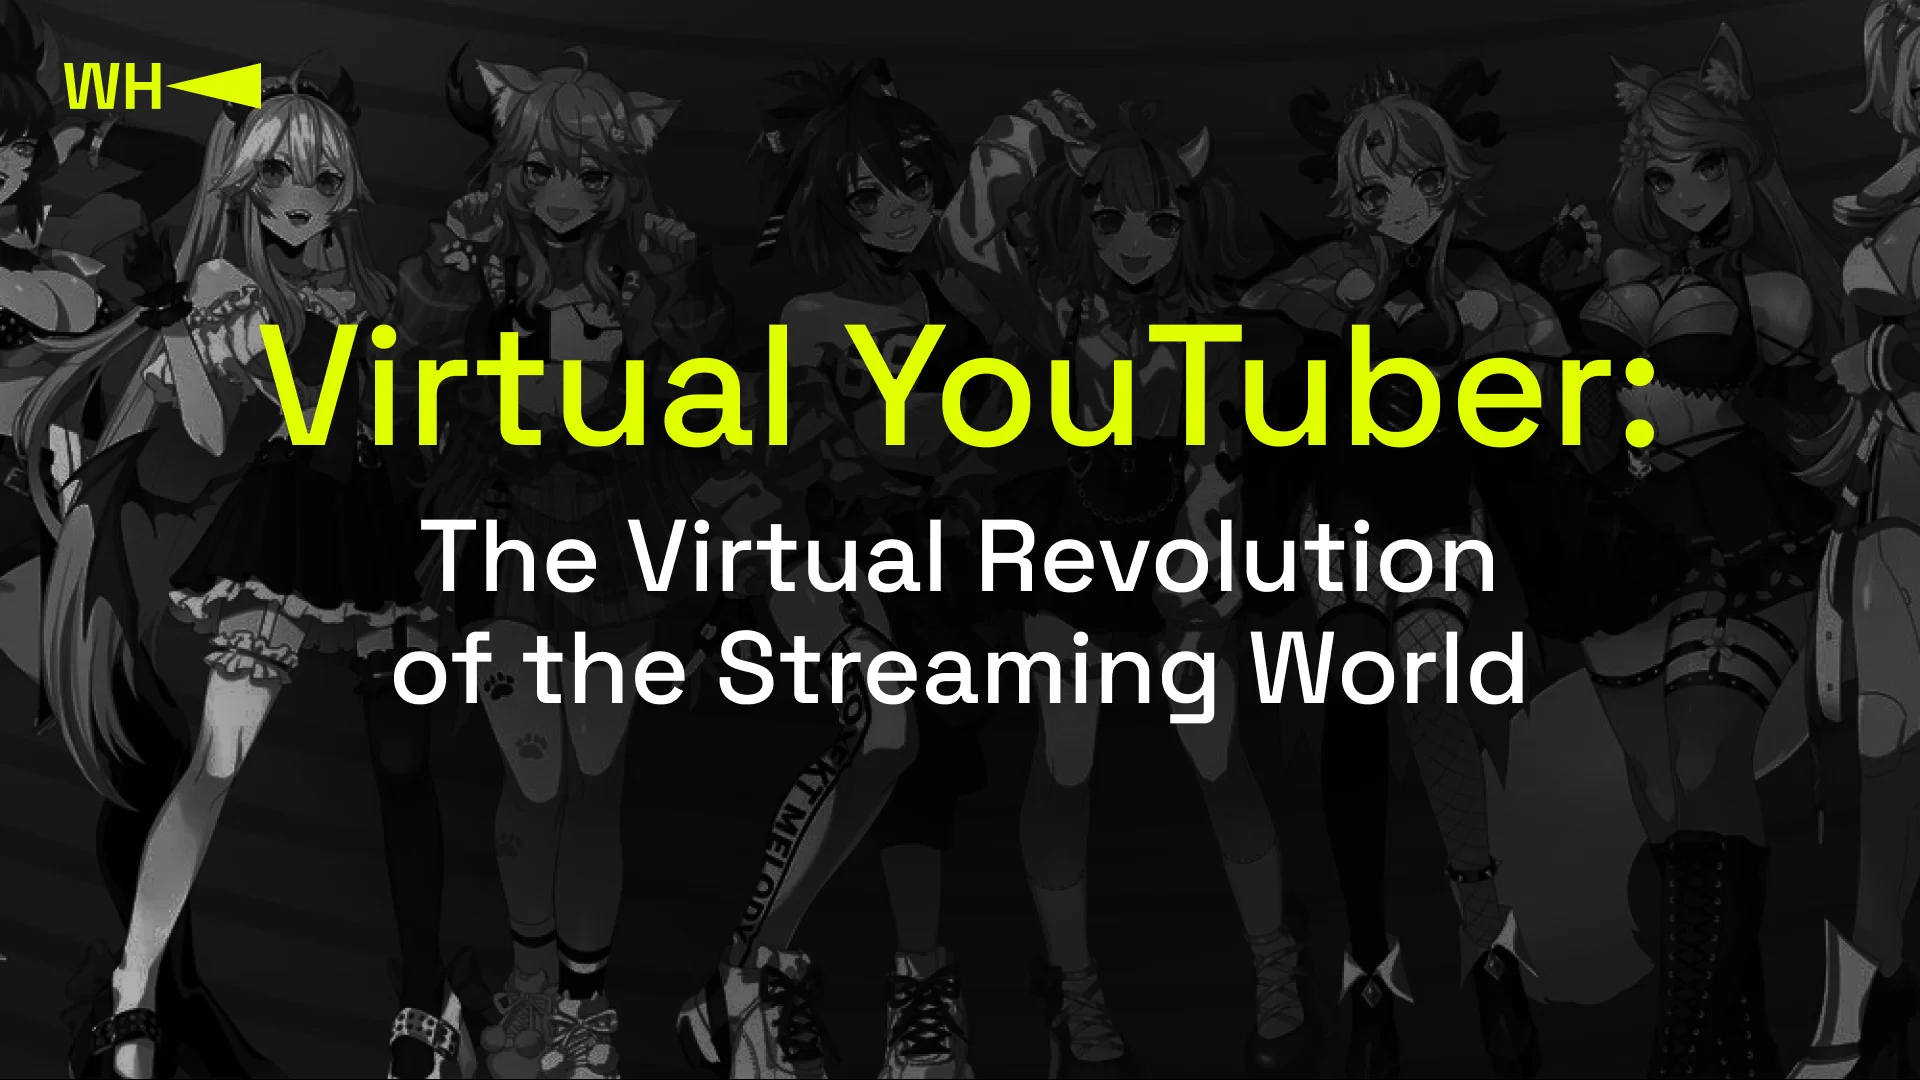 Virtual YouTuber The Virtual Revolution of the Streaming World